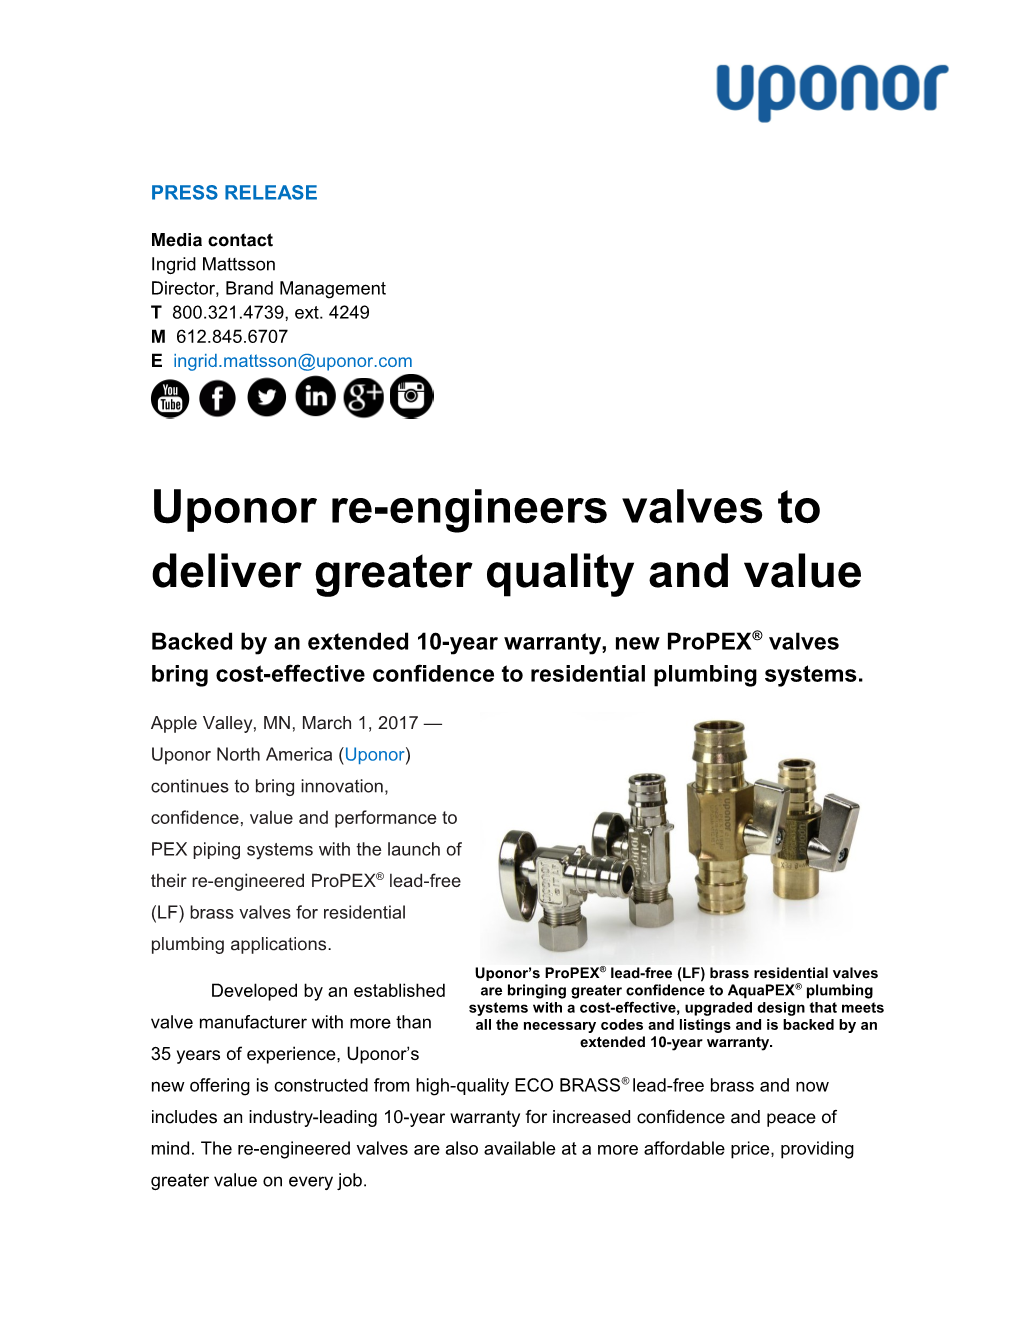 Uponor Re-Engineers Valves to Deliver Greater Quality and Value